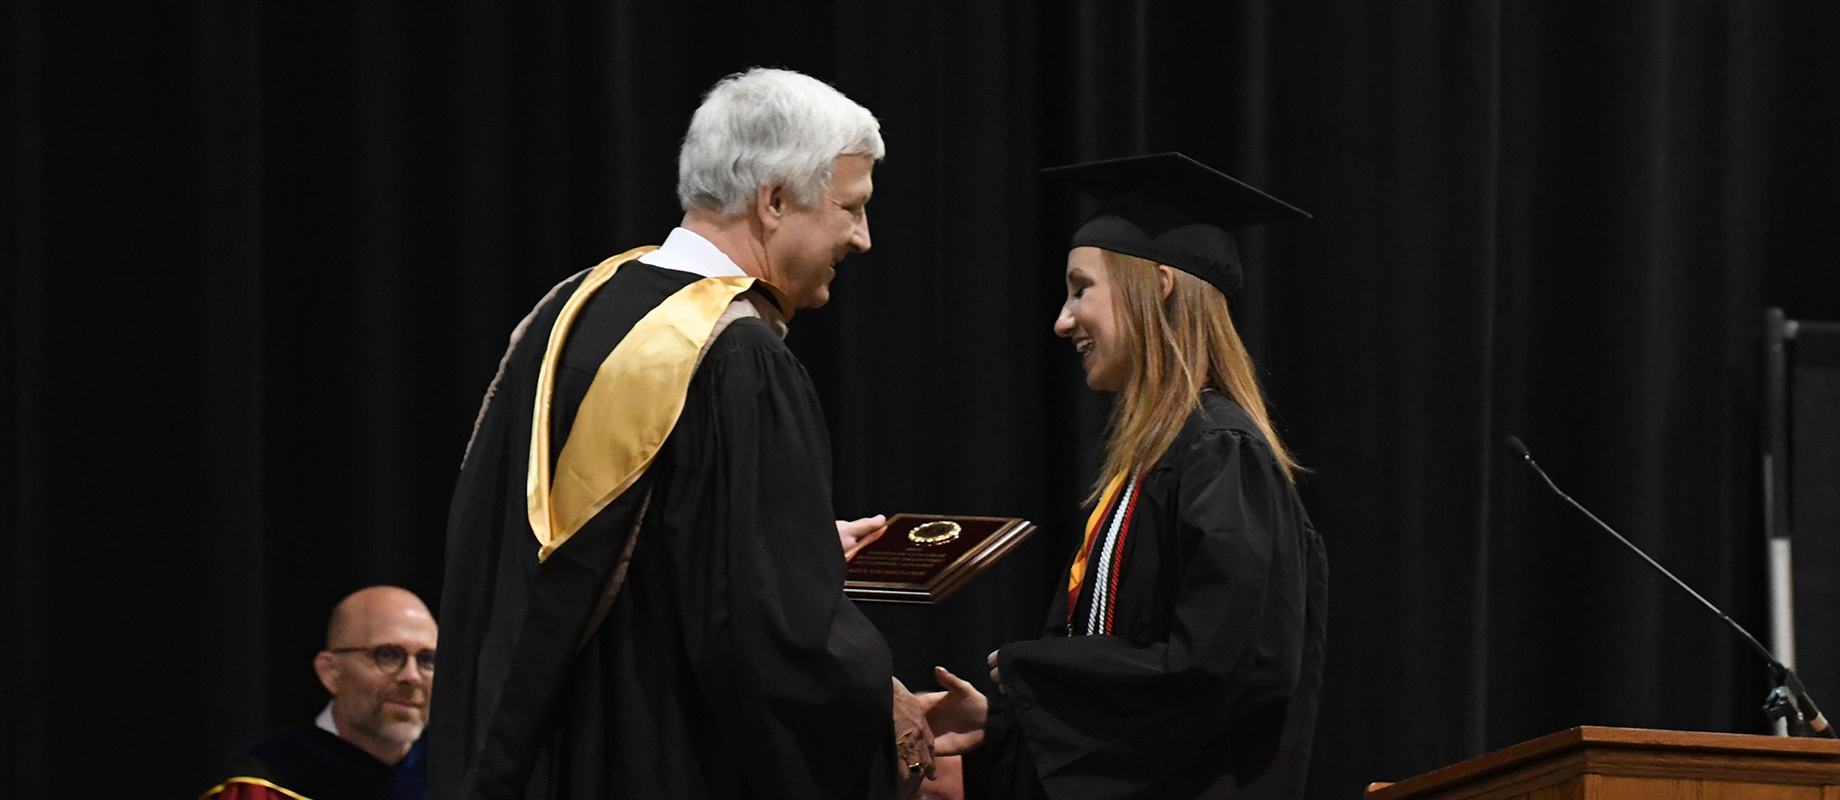 Kaitlyn Mulder earned the Trustees' Academic Award at the 2019 commencement ceremony.